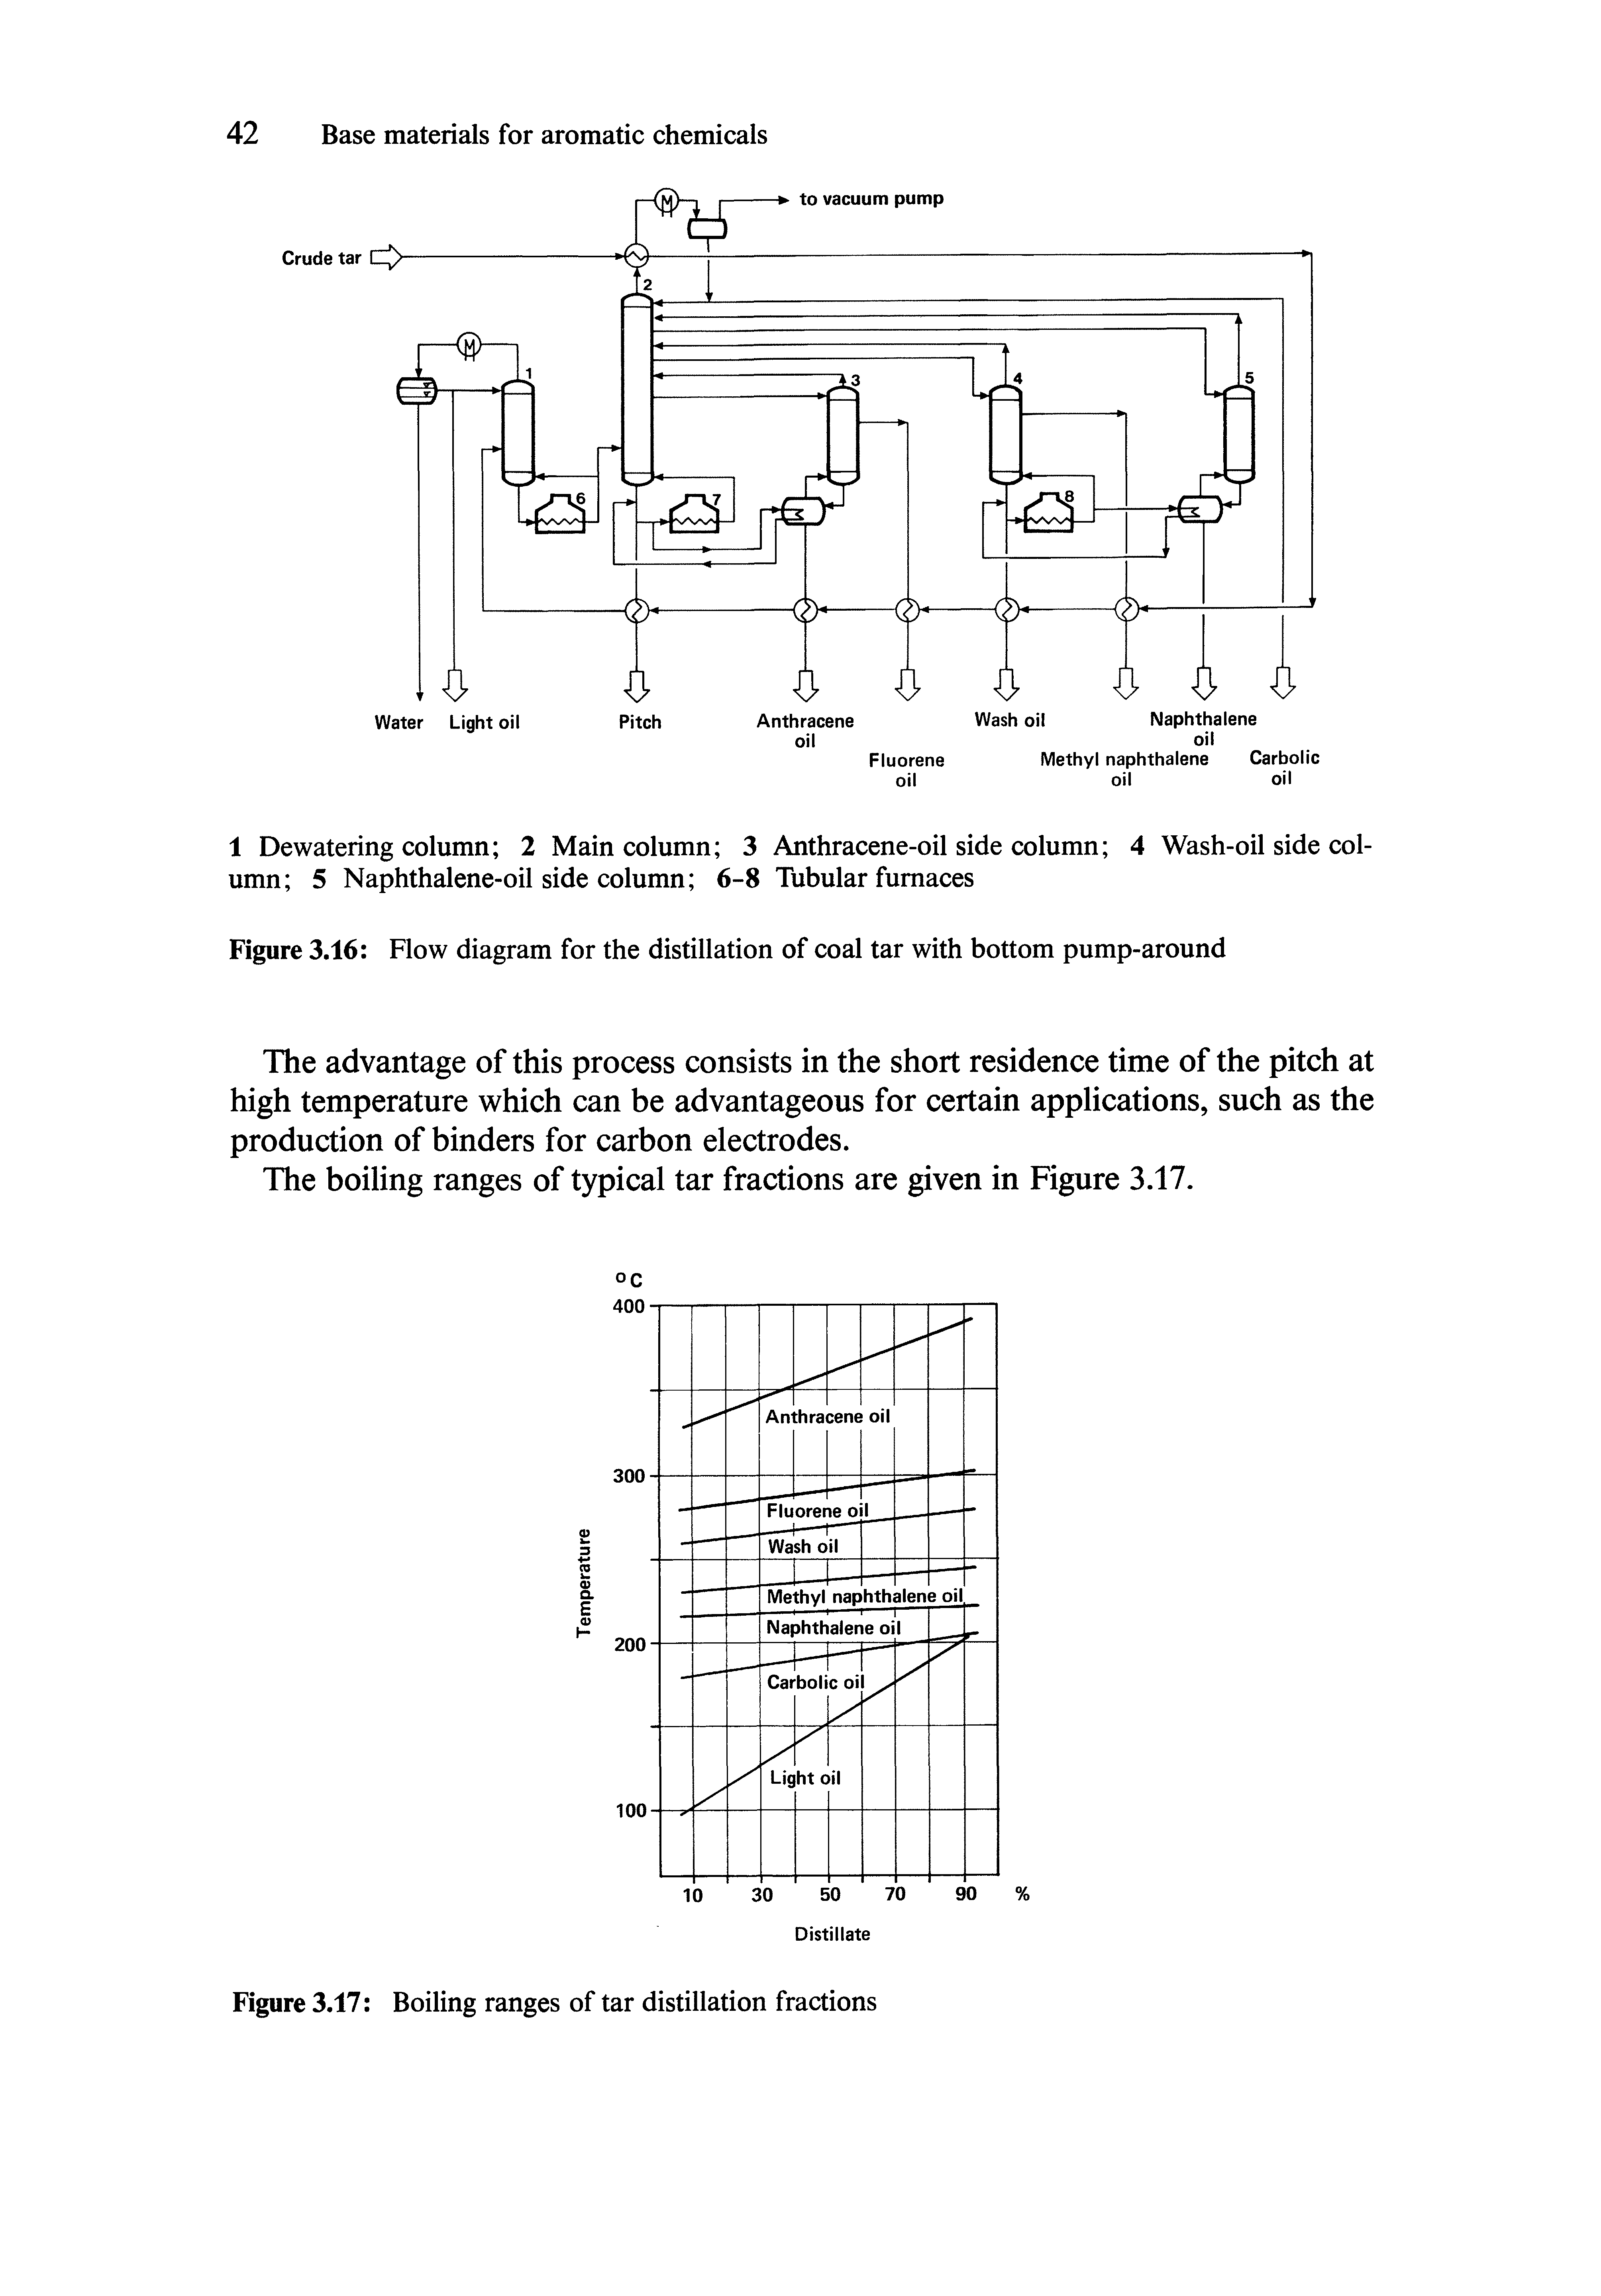 Figure 3.16 Flow diagram for the distillation of coal tar with bottom pump-around...